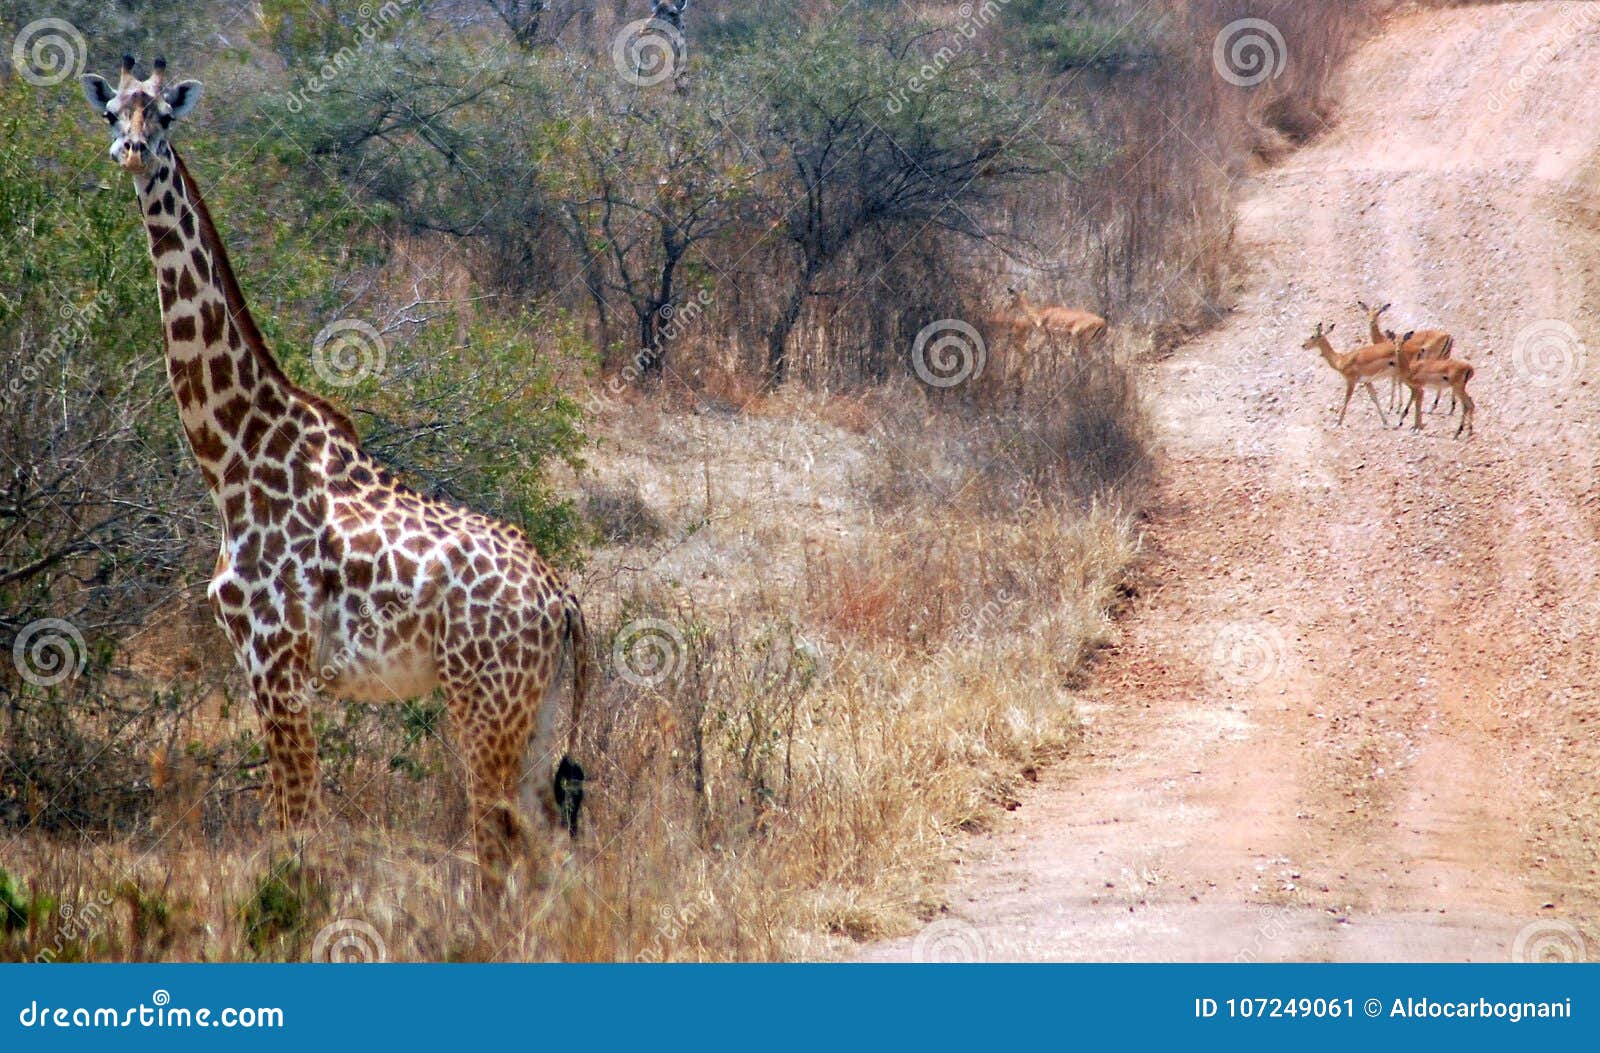 giraffe with background of a road with gazelles